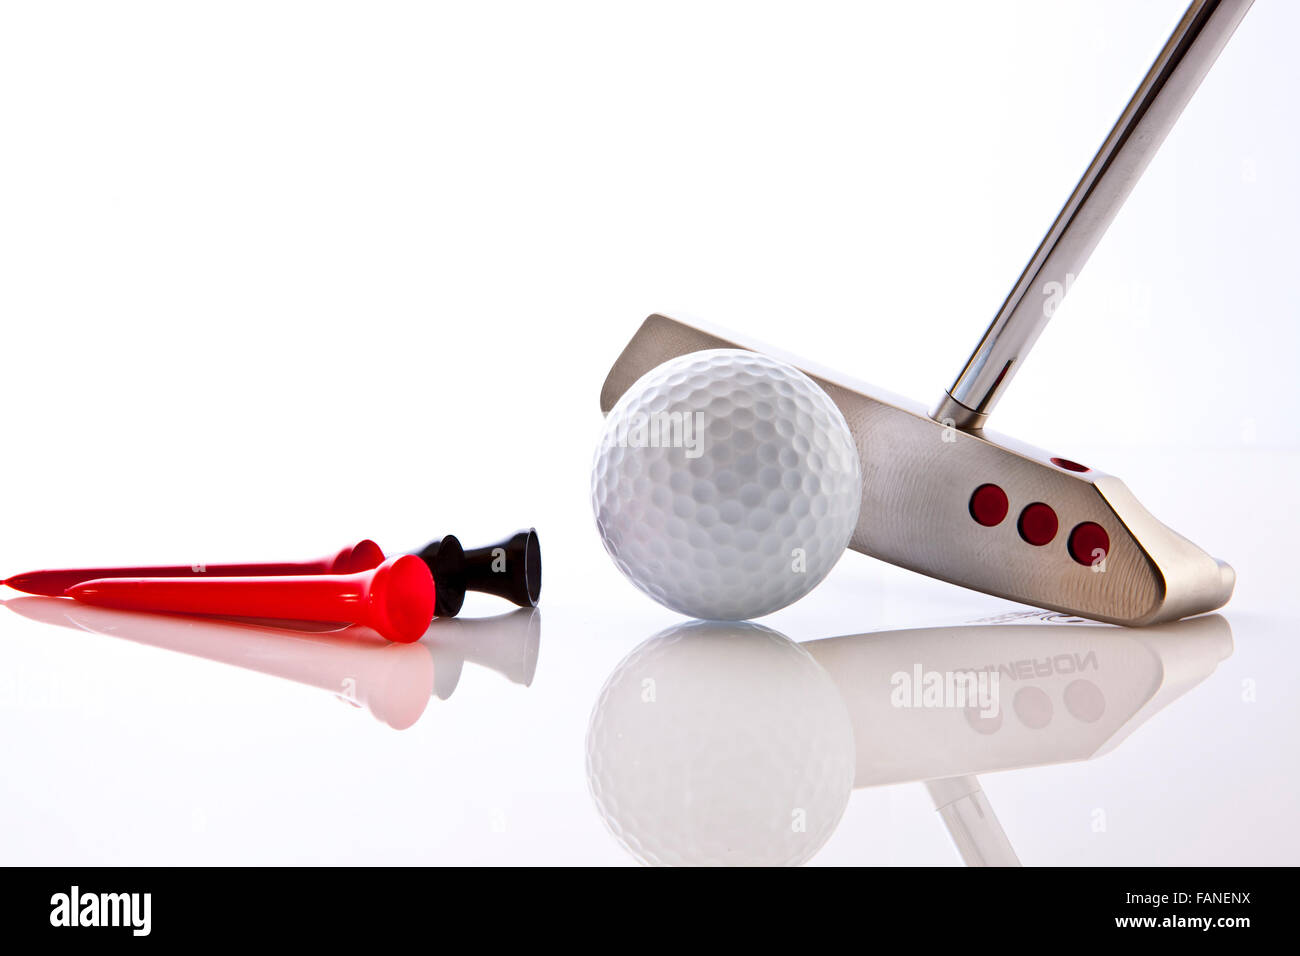 Golf Putter with ball and tees on a whiter background Stock Photo